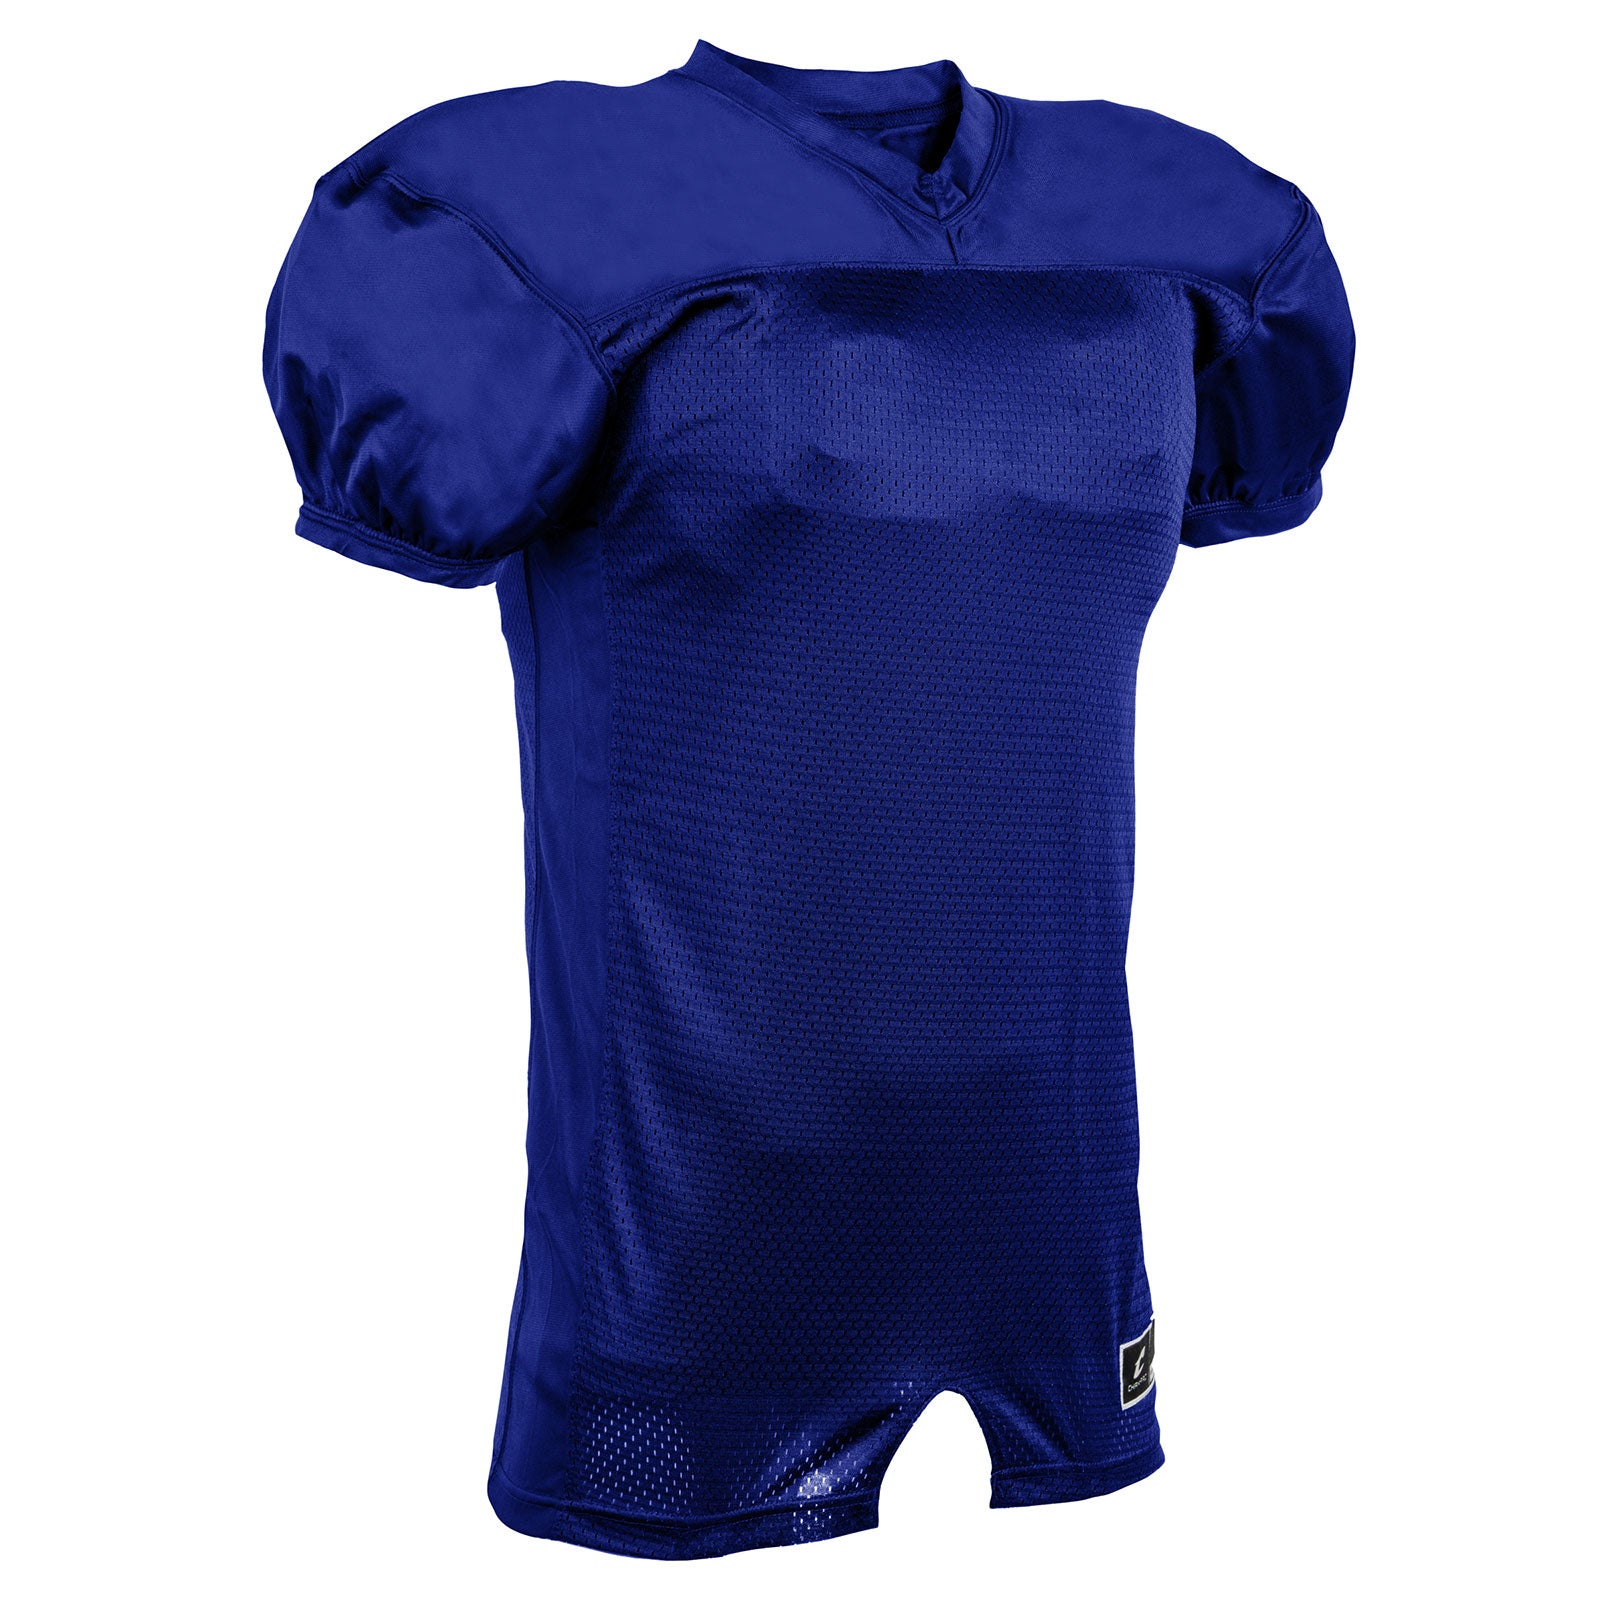 Pro Game Stretch Mesh Solid Football Jersey ROYAL BODY